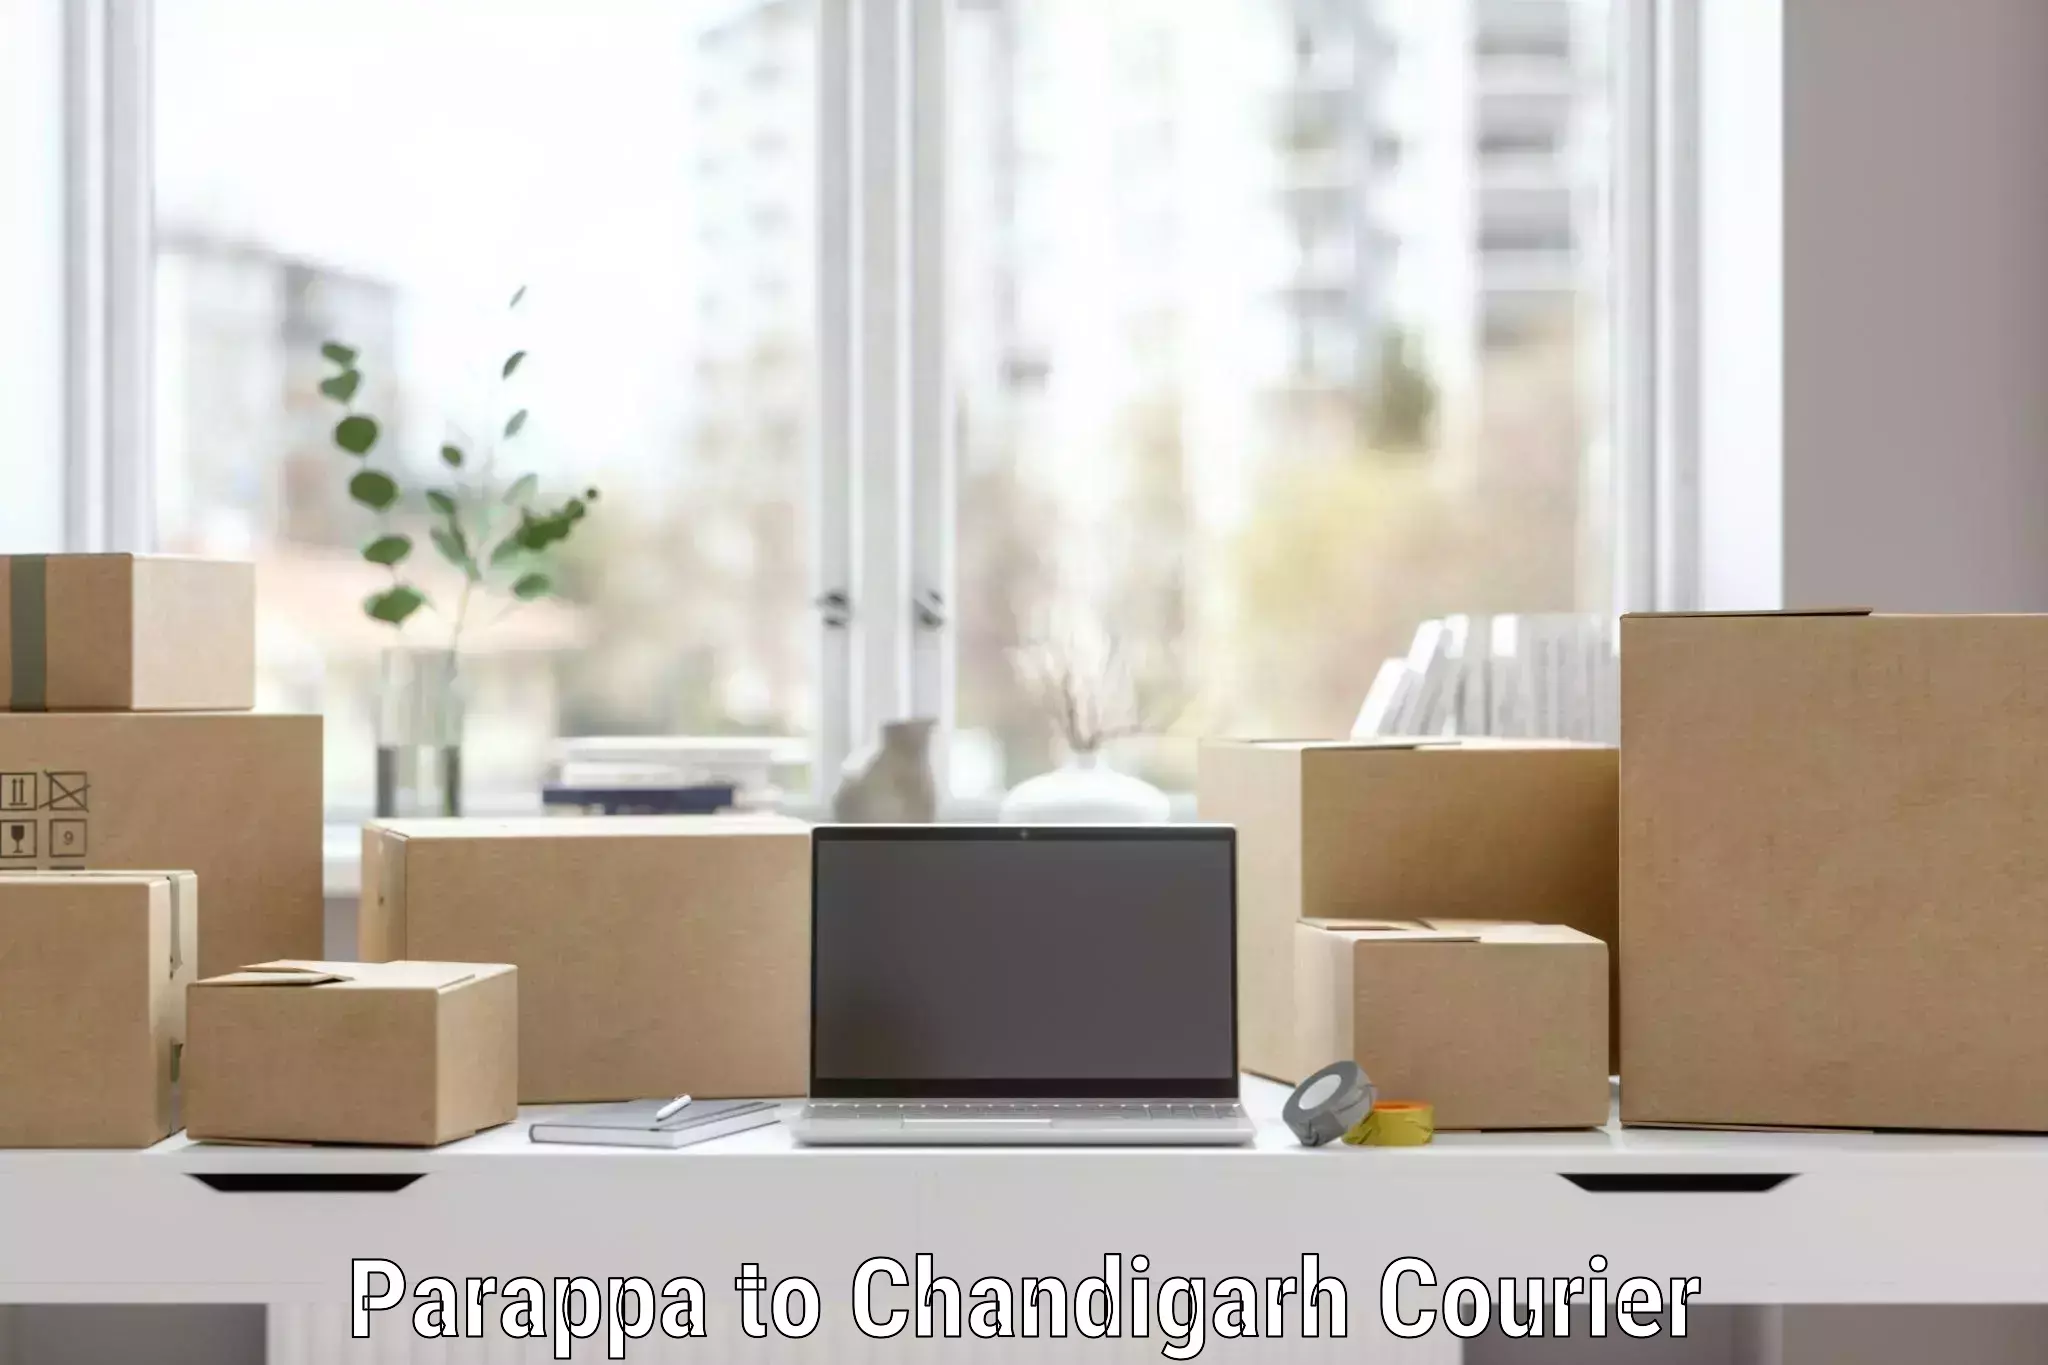 Home goods movers Parappa to Chandigarh